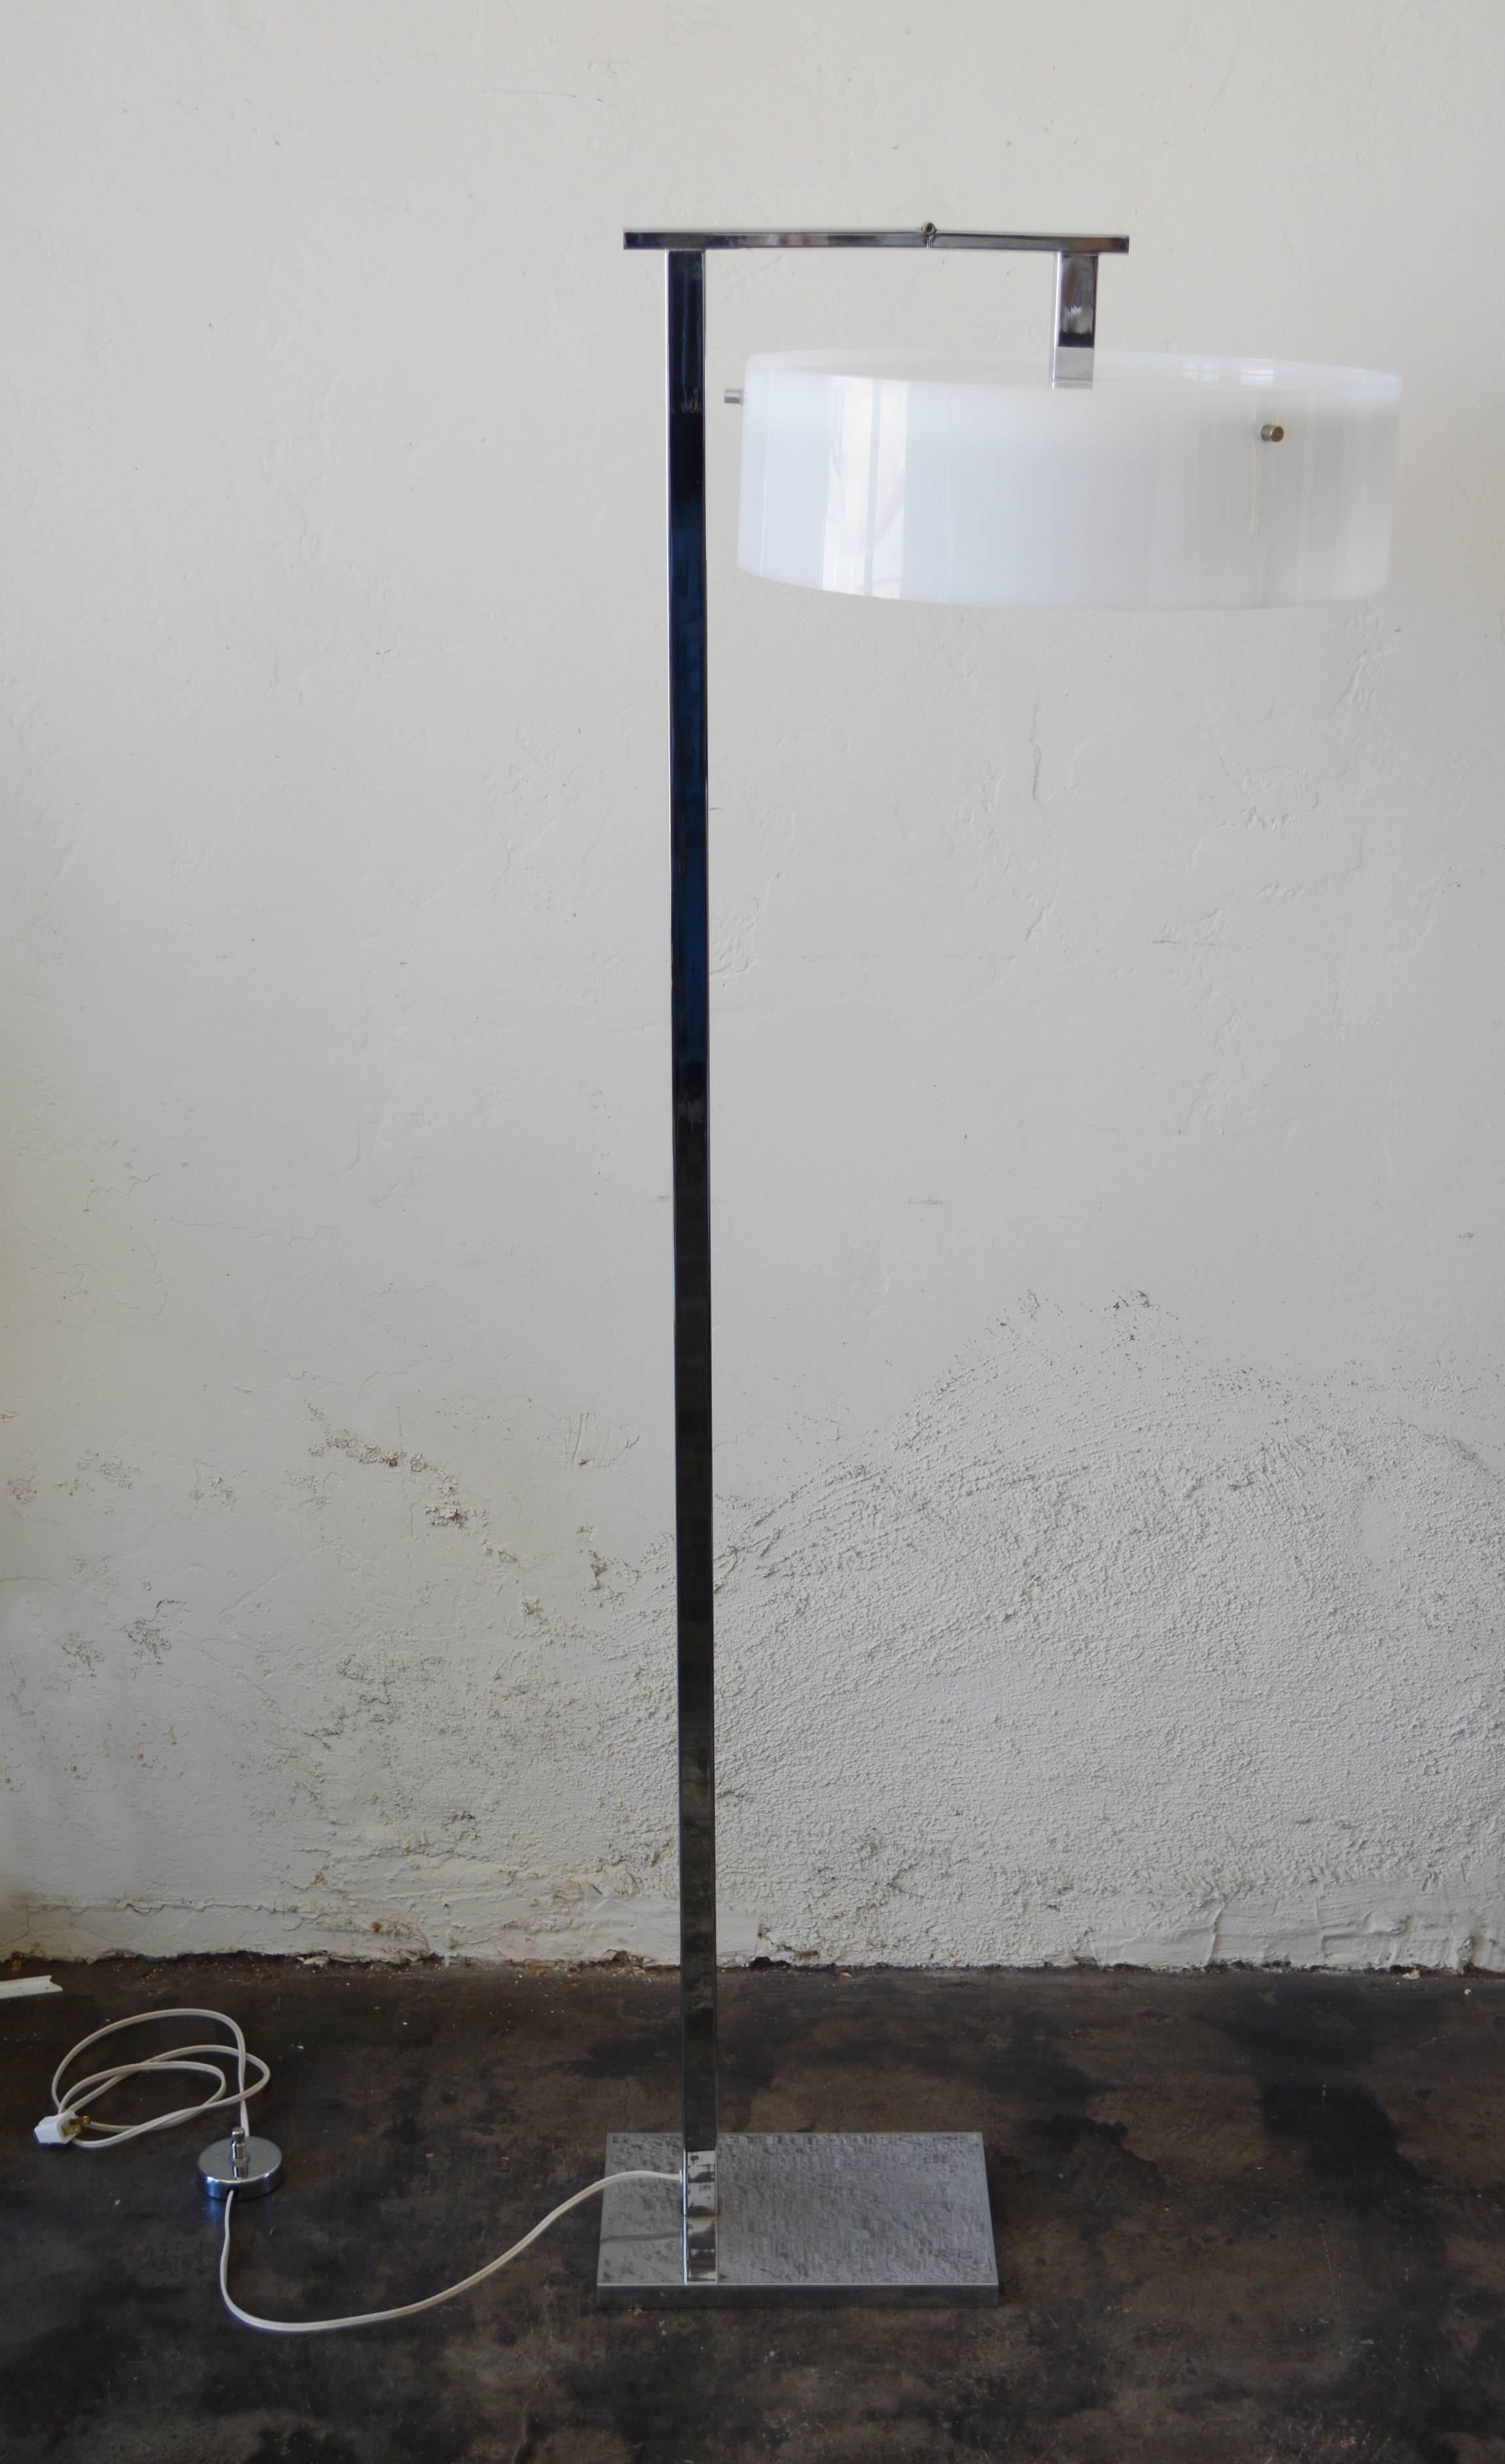 Flip-top floor lamp in the style of Kurt Versen. The shade can be placed in an upward or downward position. The lamp takes three bulbs. This does not have a diffuser on the bulb side. The lamp uses a foot switch. It has been rewired. Dimensions